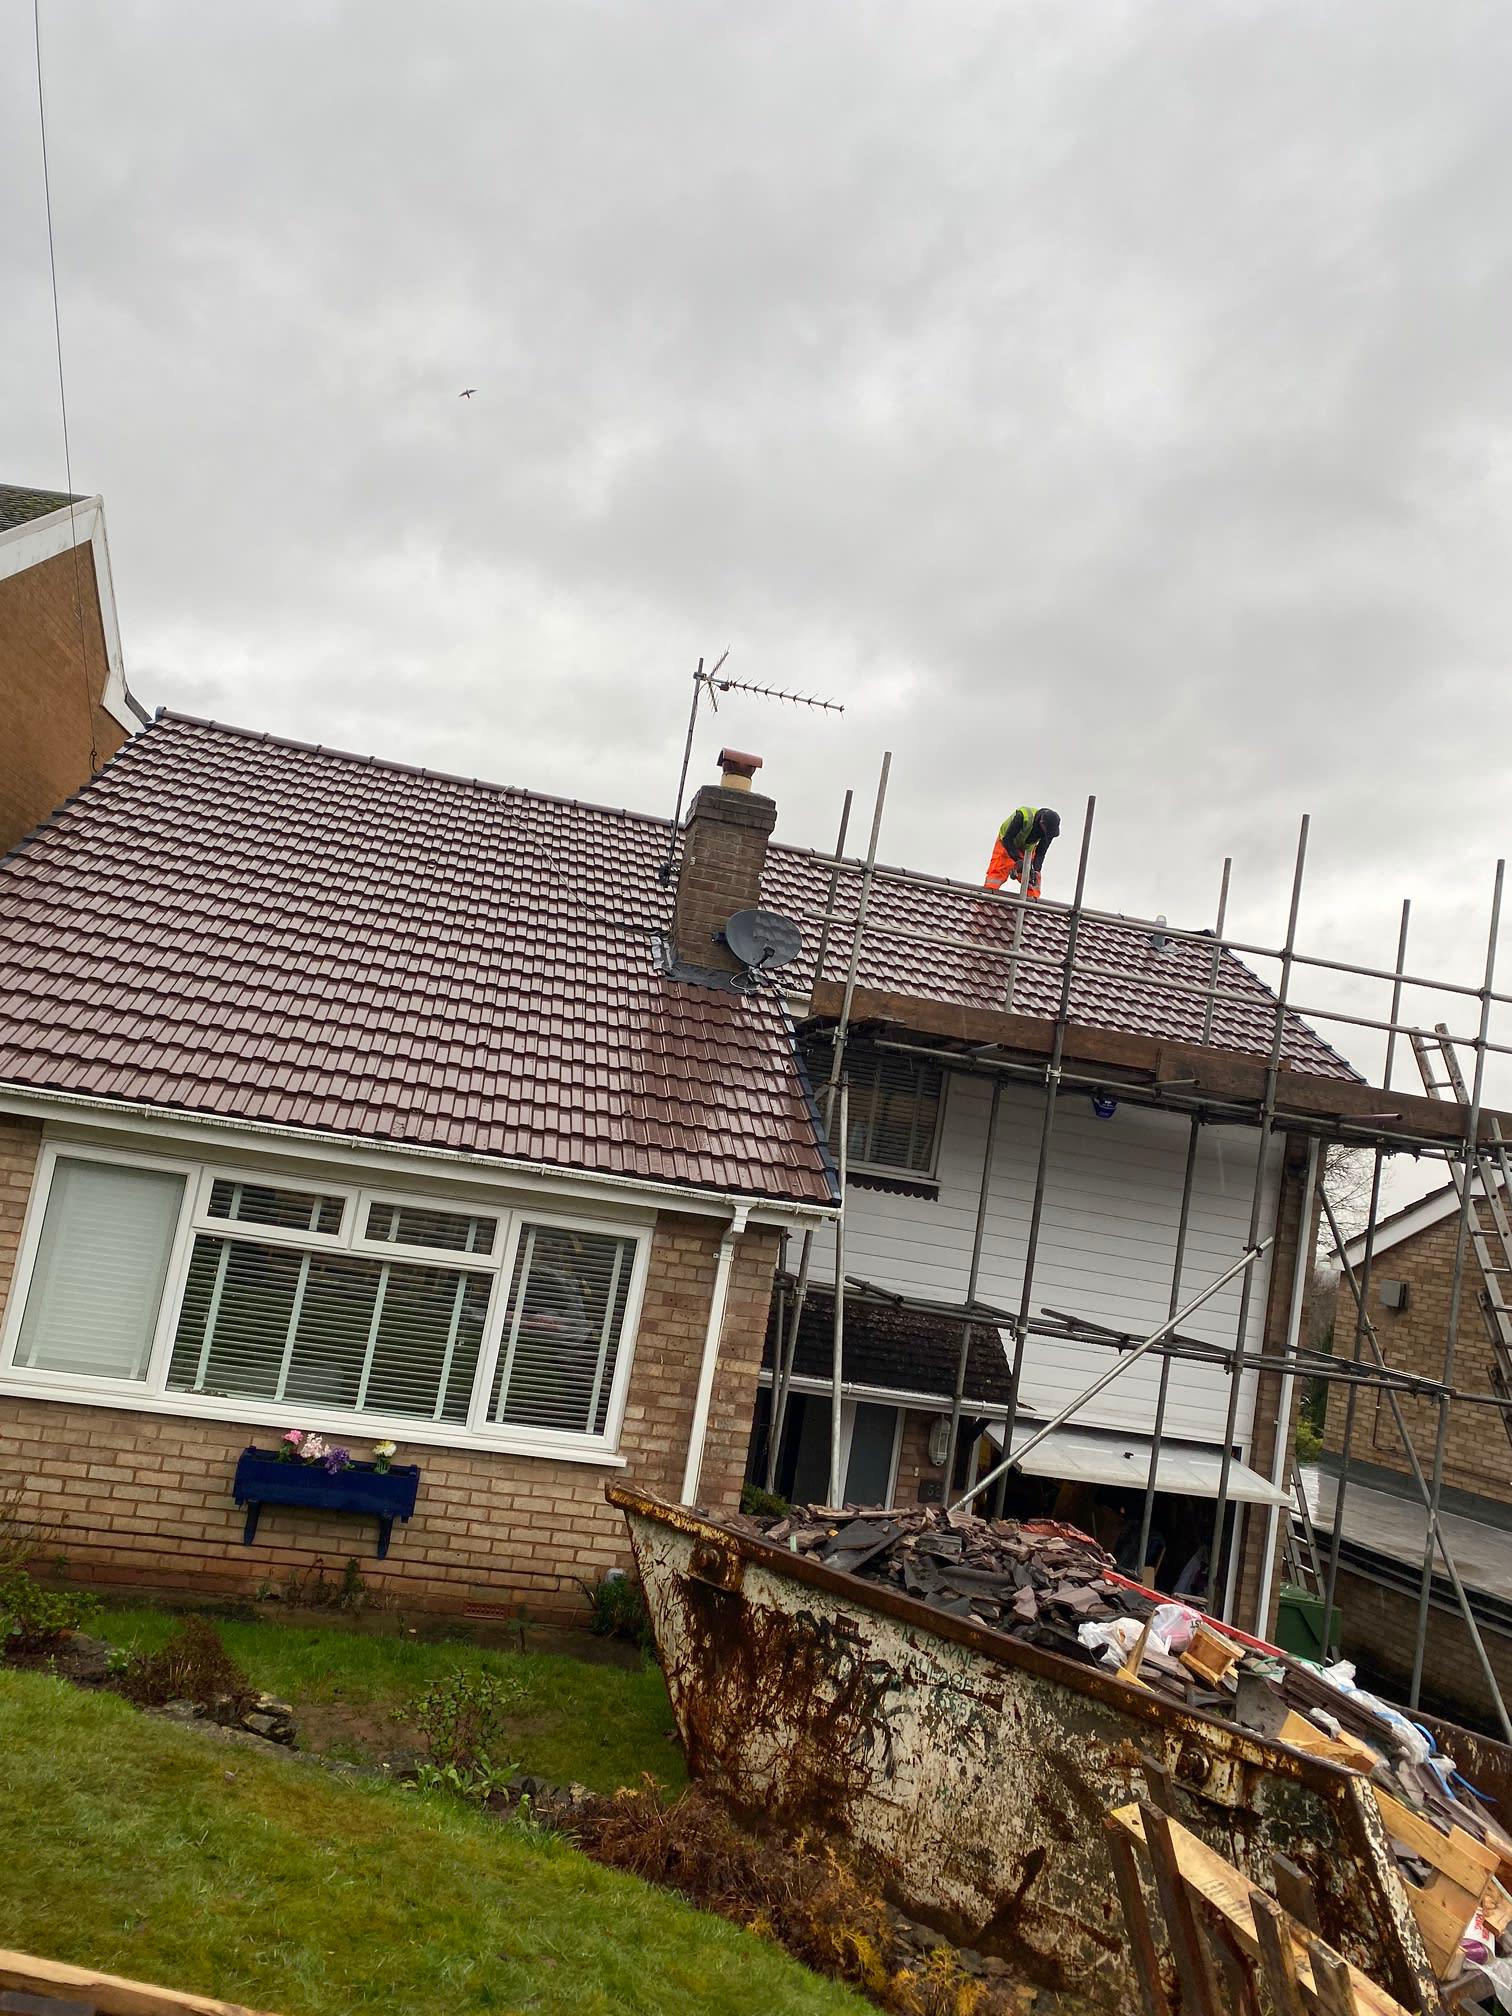 Images BB Roofing Solutions Ltd